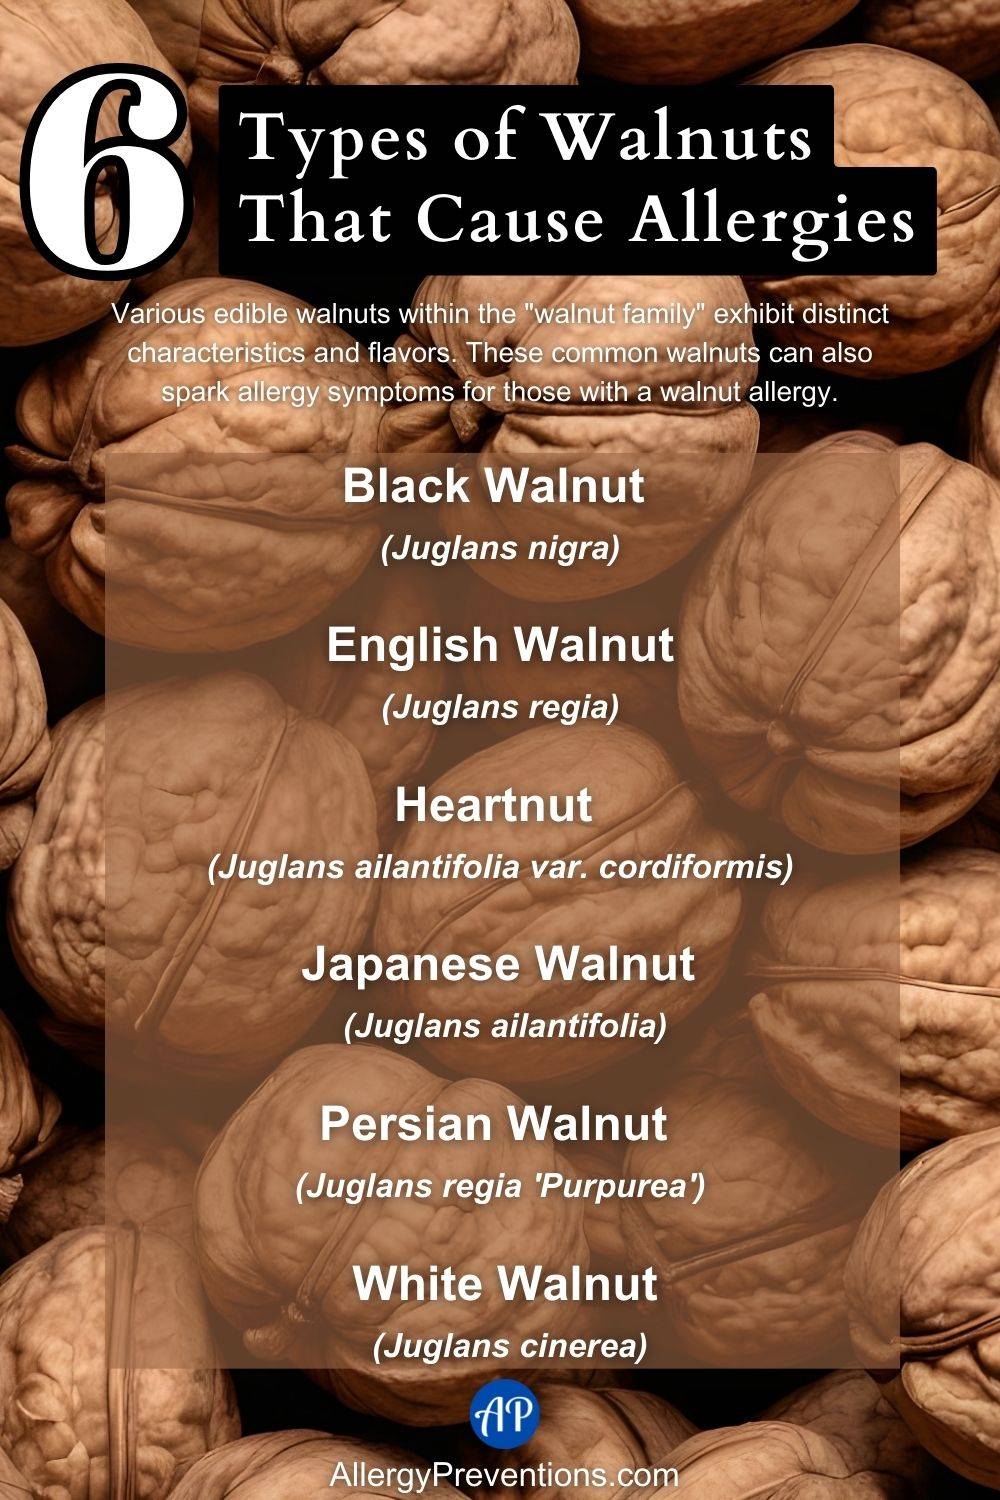 Types of Walnuts That Cause Allergies Infographic. Various edible walnuts within the "walnut family" exhibit distinct characteristics and flavors. These common walnuts can also spark allergy symptoms for those with a walnut allergy. Black Walnut (Juglans nigra), White Walnut (Juglans cinerea), English Walnut (Juglans regia), Heartnut (Juglans ailantifolia var. cordiformis), Japanese Walnut (Juglans ailantifolia), and Persian Walnut (Juglans regia 'Purpurea').